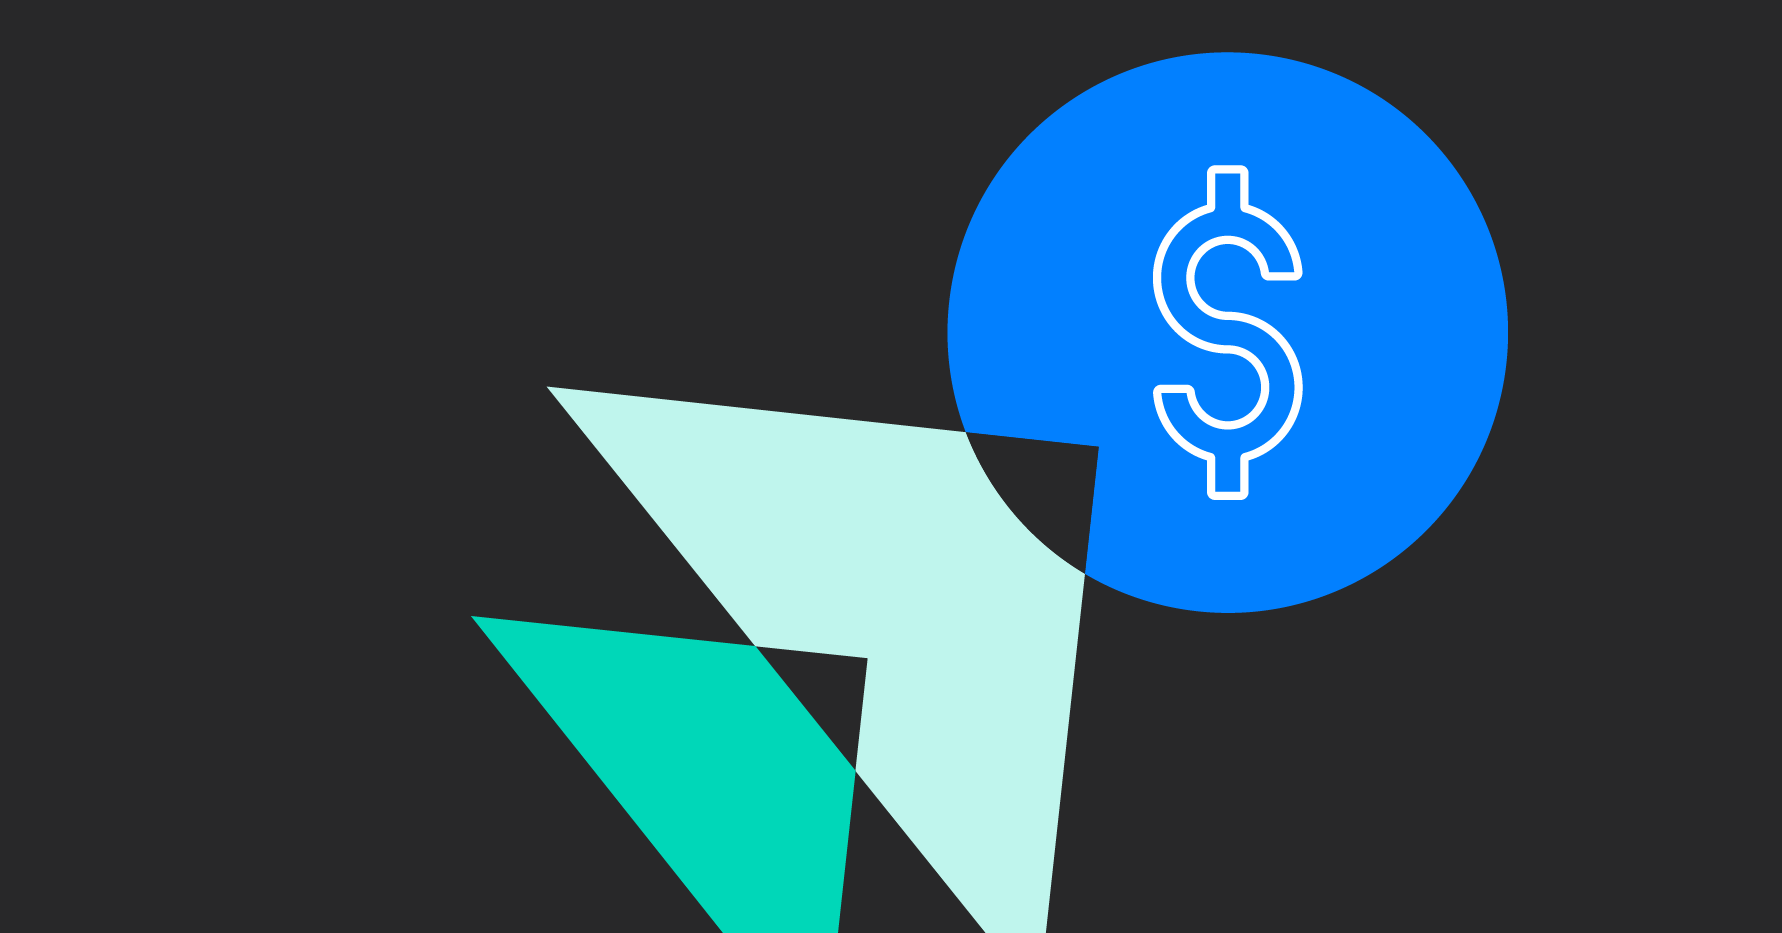 Illustration of a circle with a dollar sign and two overlapping triangles on a black background